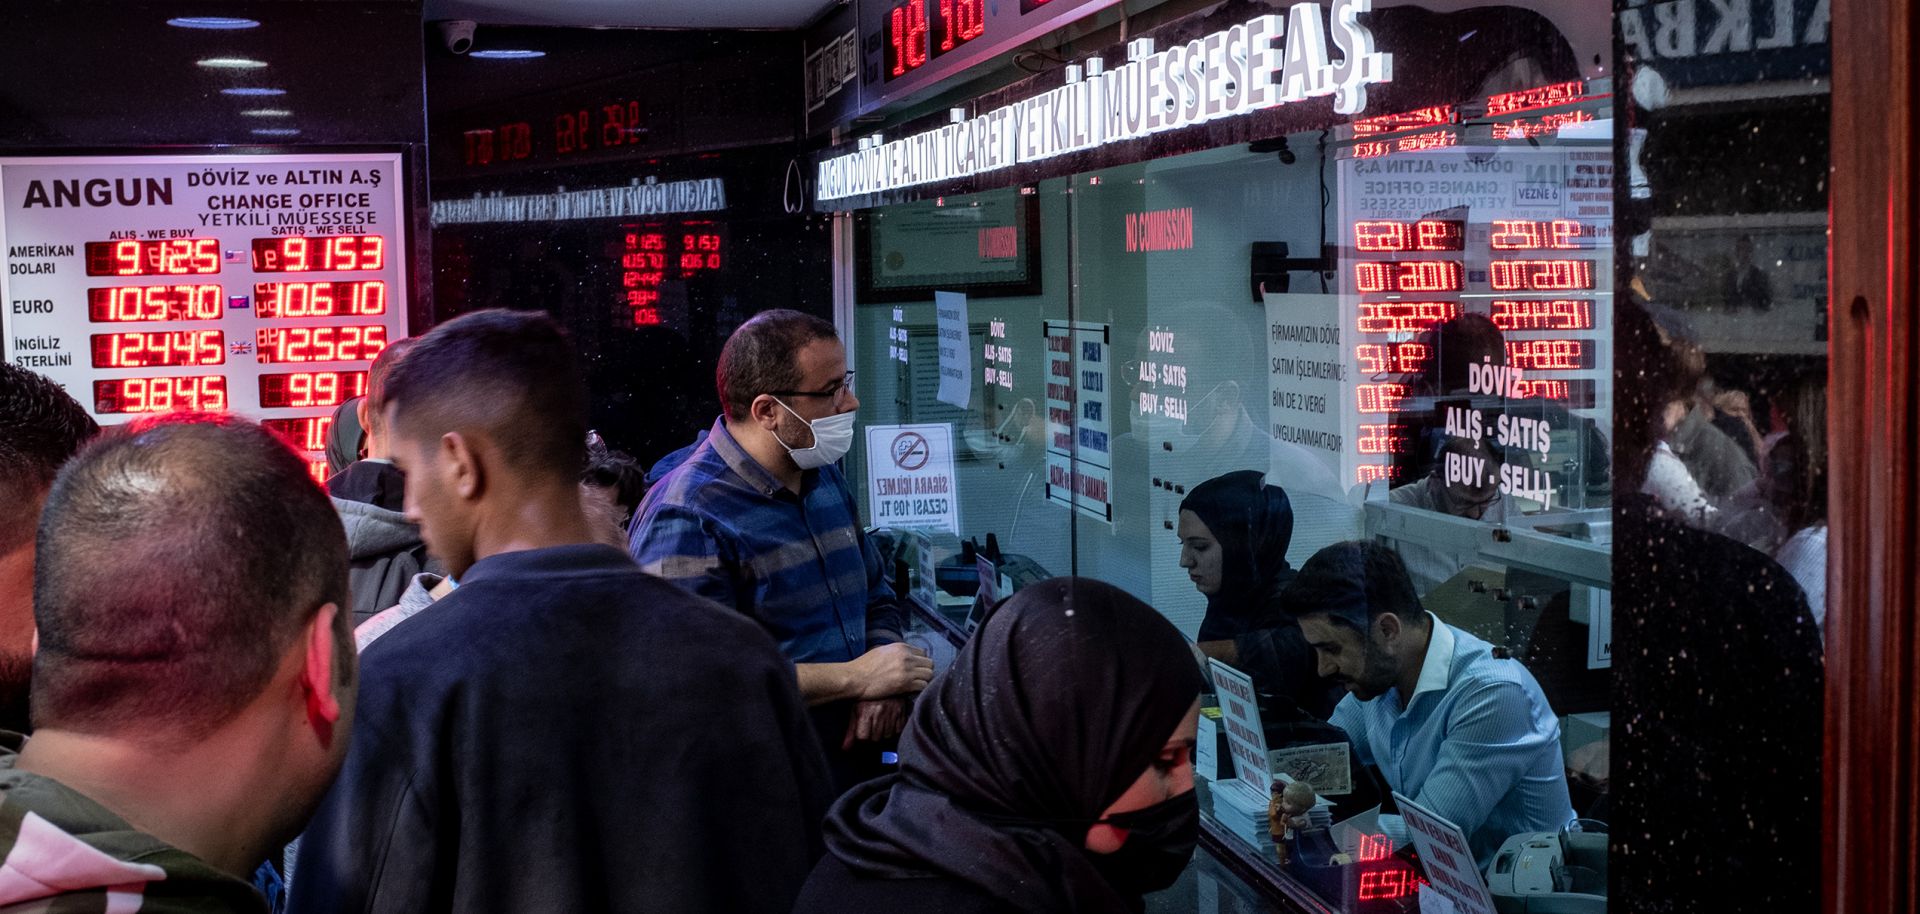 A currency exchange office on Oct. 14, 2021 in Istanbul.